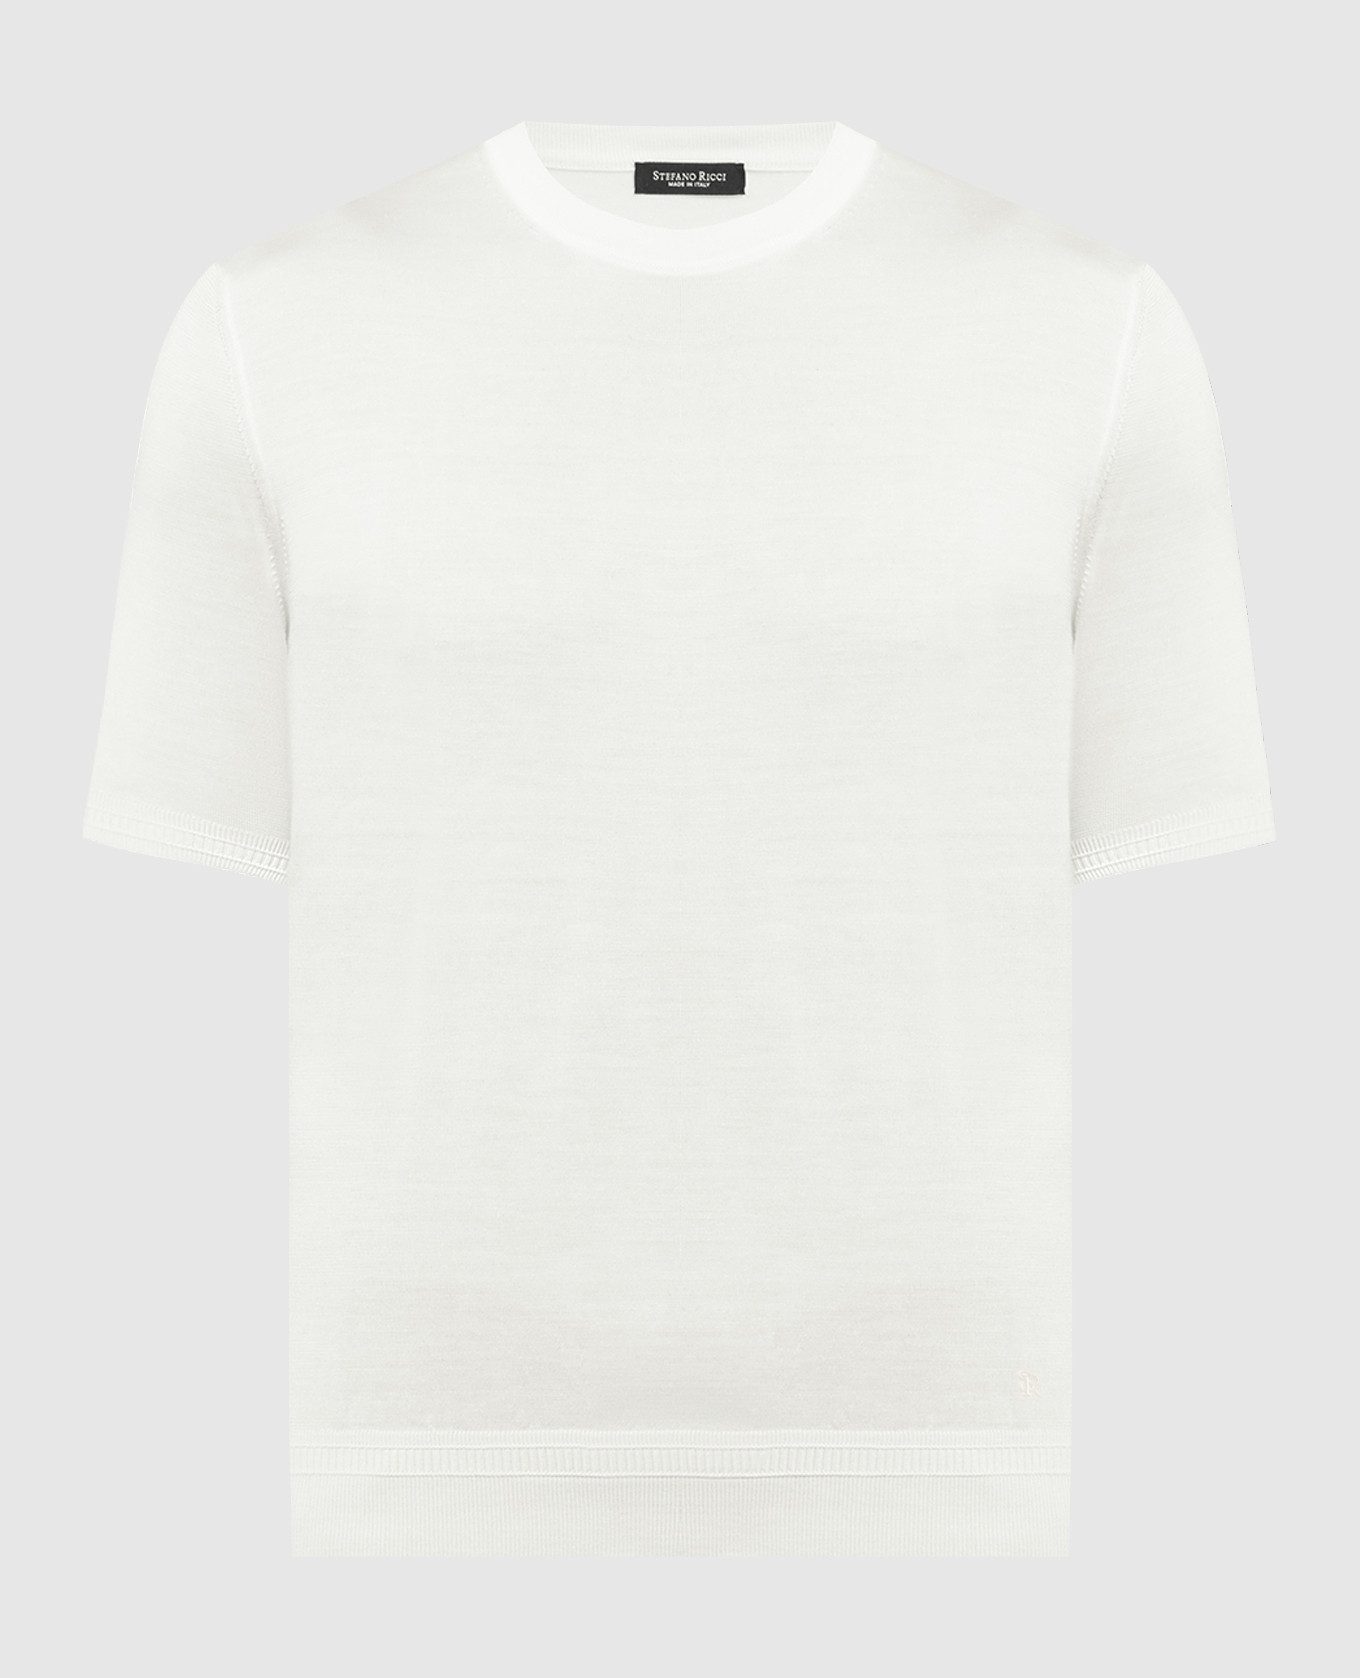 White silk t-shirt with monogram logo embroidery